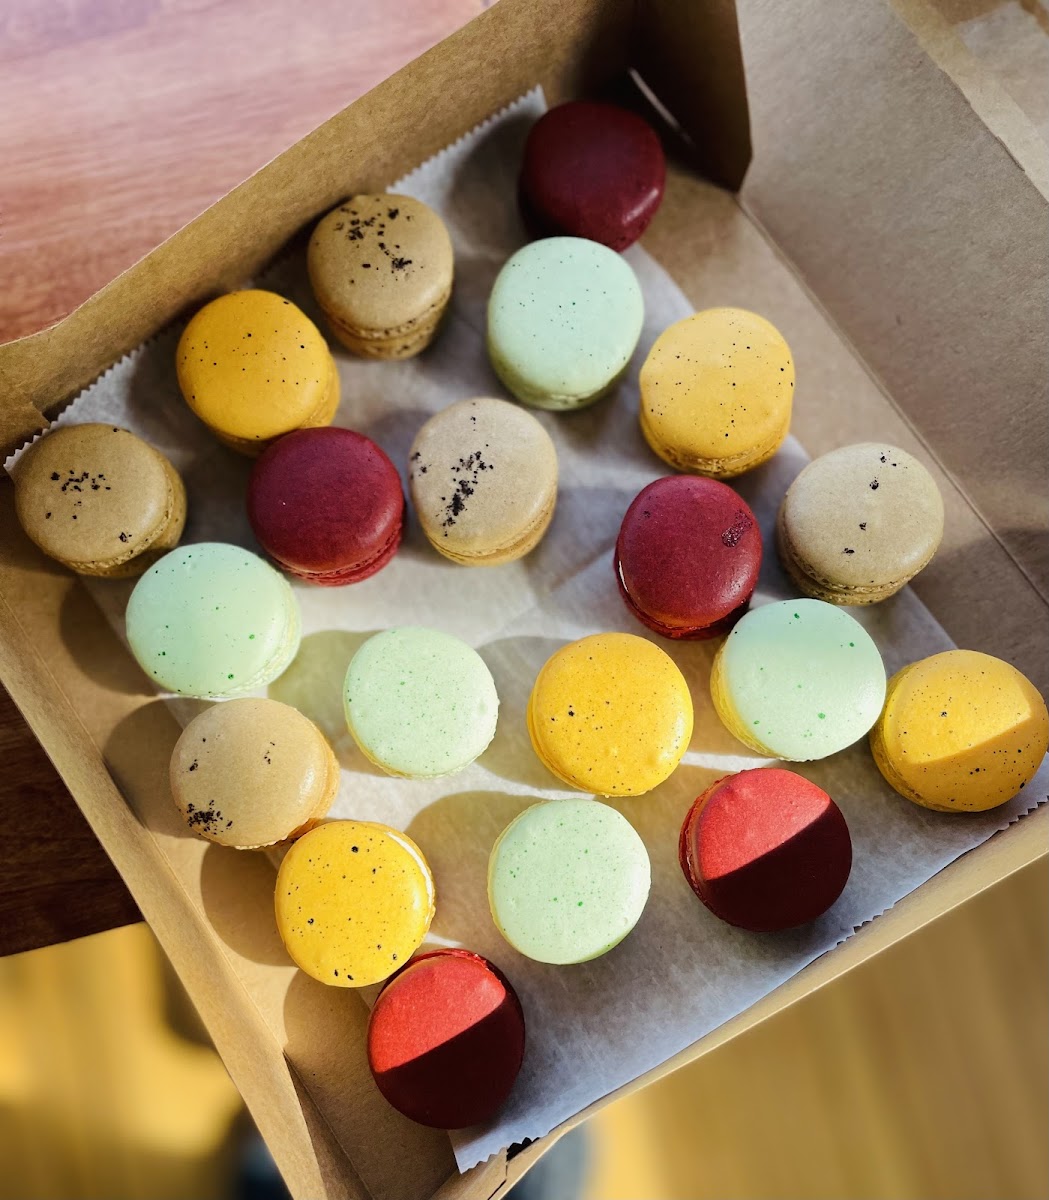 Macaron's are made with almond flour and are gluten free!